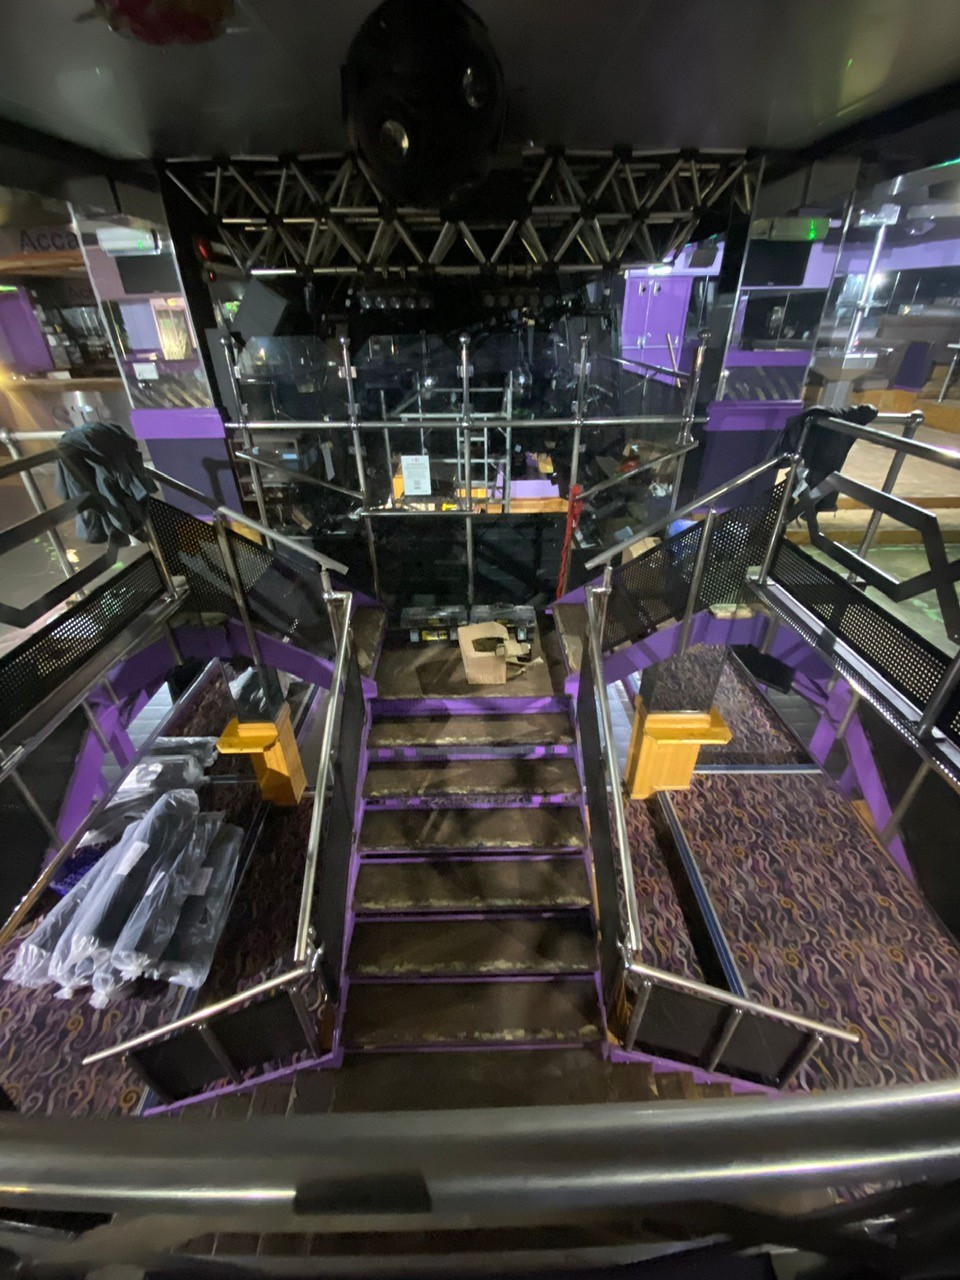 Acapulco Nightclub Halifax stairs being installed with bespoke purple and black patterned carpets designed by Wilton Carpets